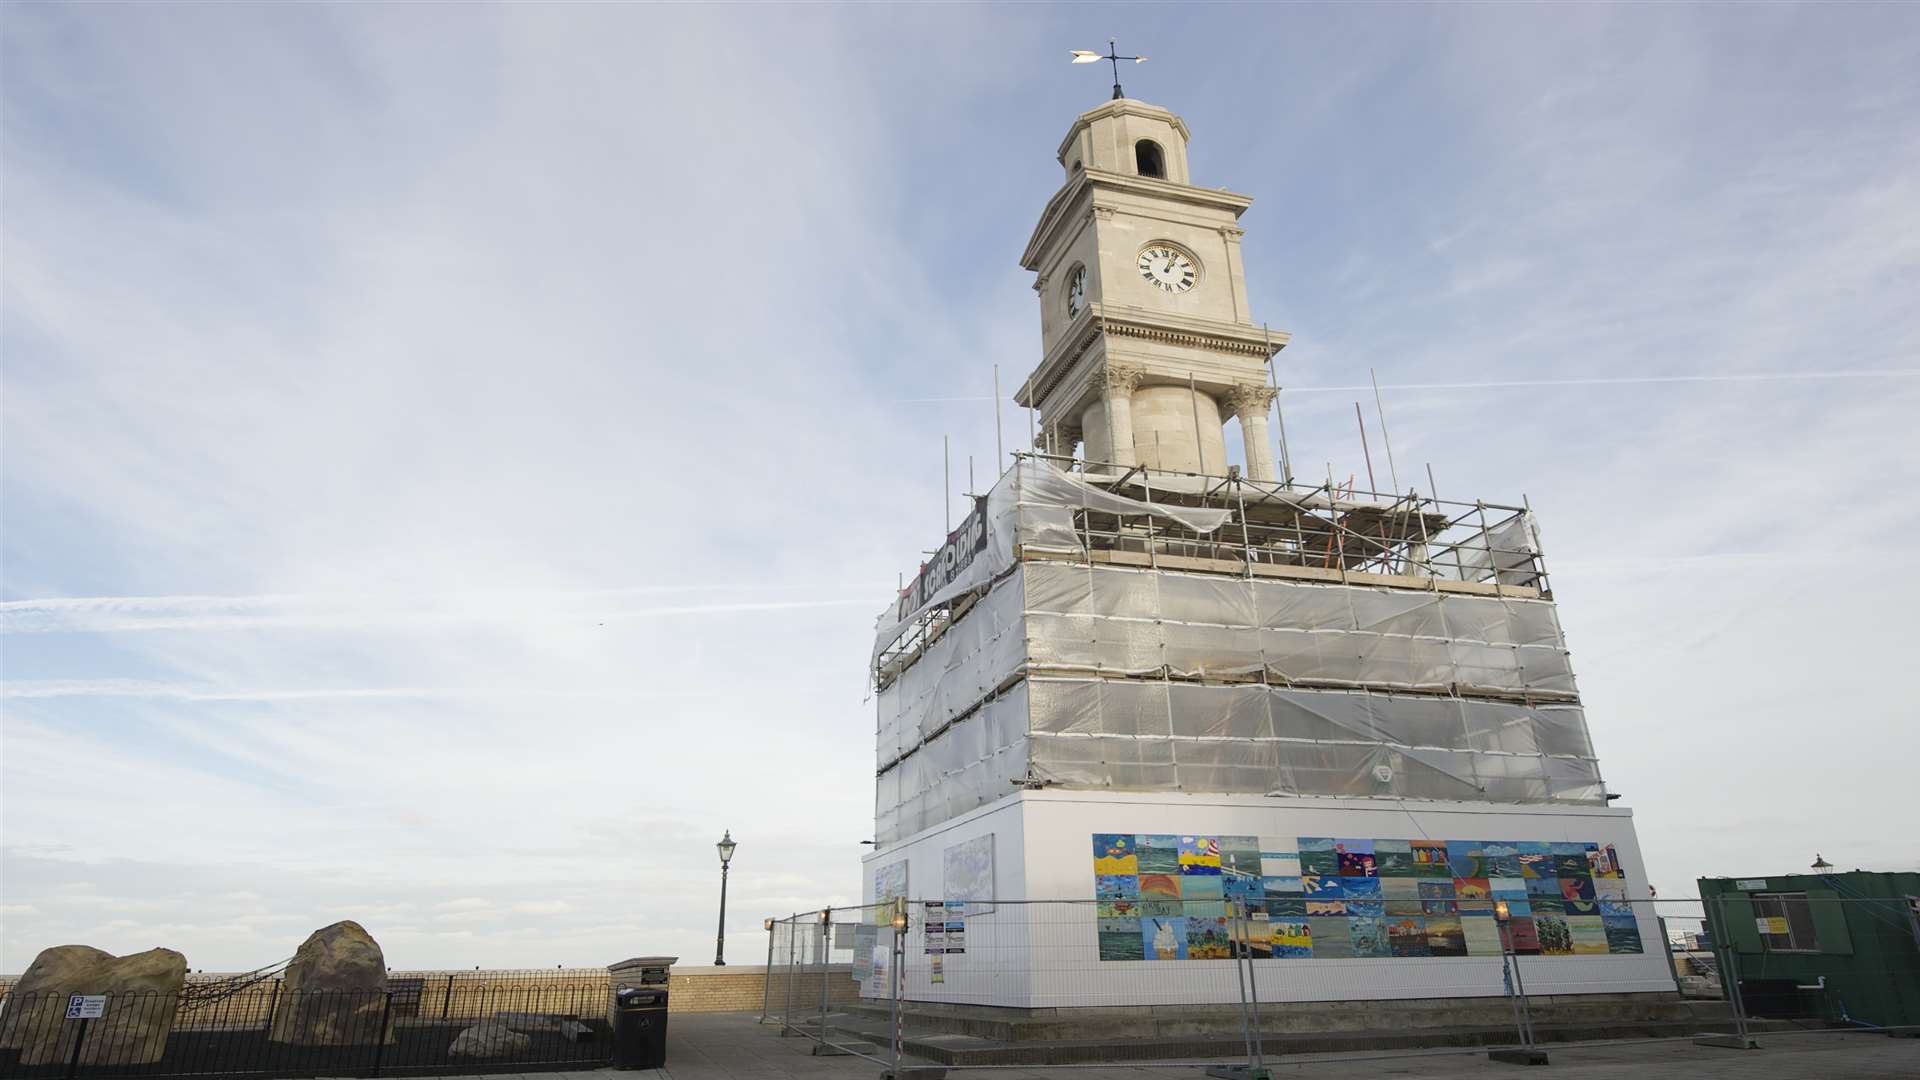 Herne Bay Clock Tower is currently protected by scaffolding